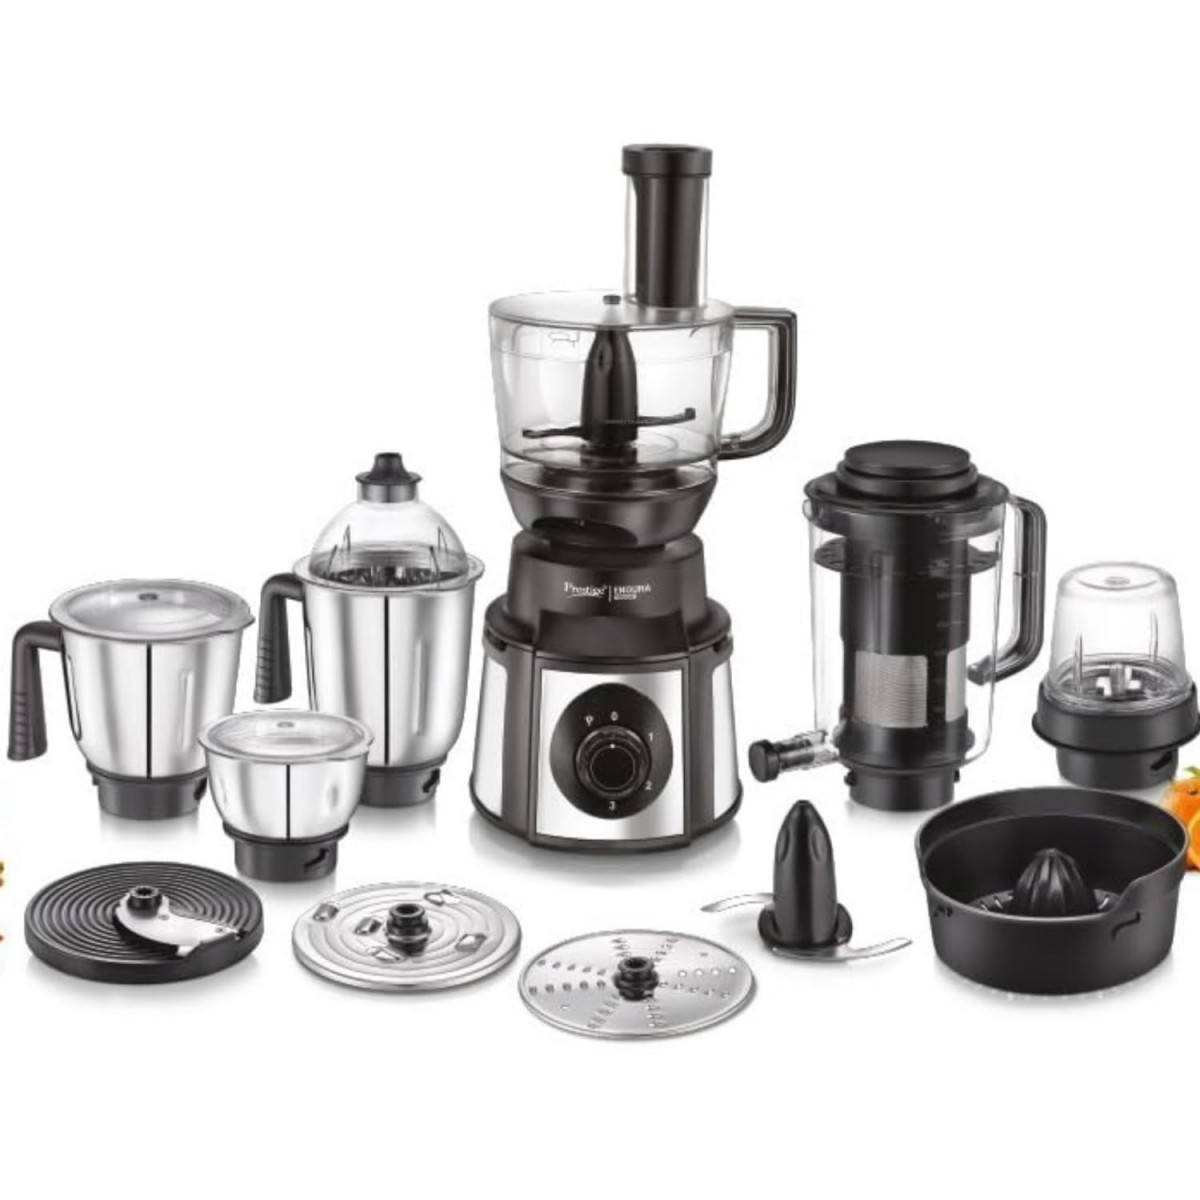 Prestige Endura Pro 1000W Multi Functional Mixer Grinder with Ball Bearing Technology6 Jars with food processing attachments 14 different functionalitiesBlack  Silver